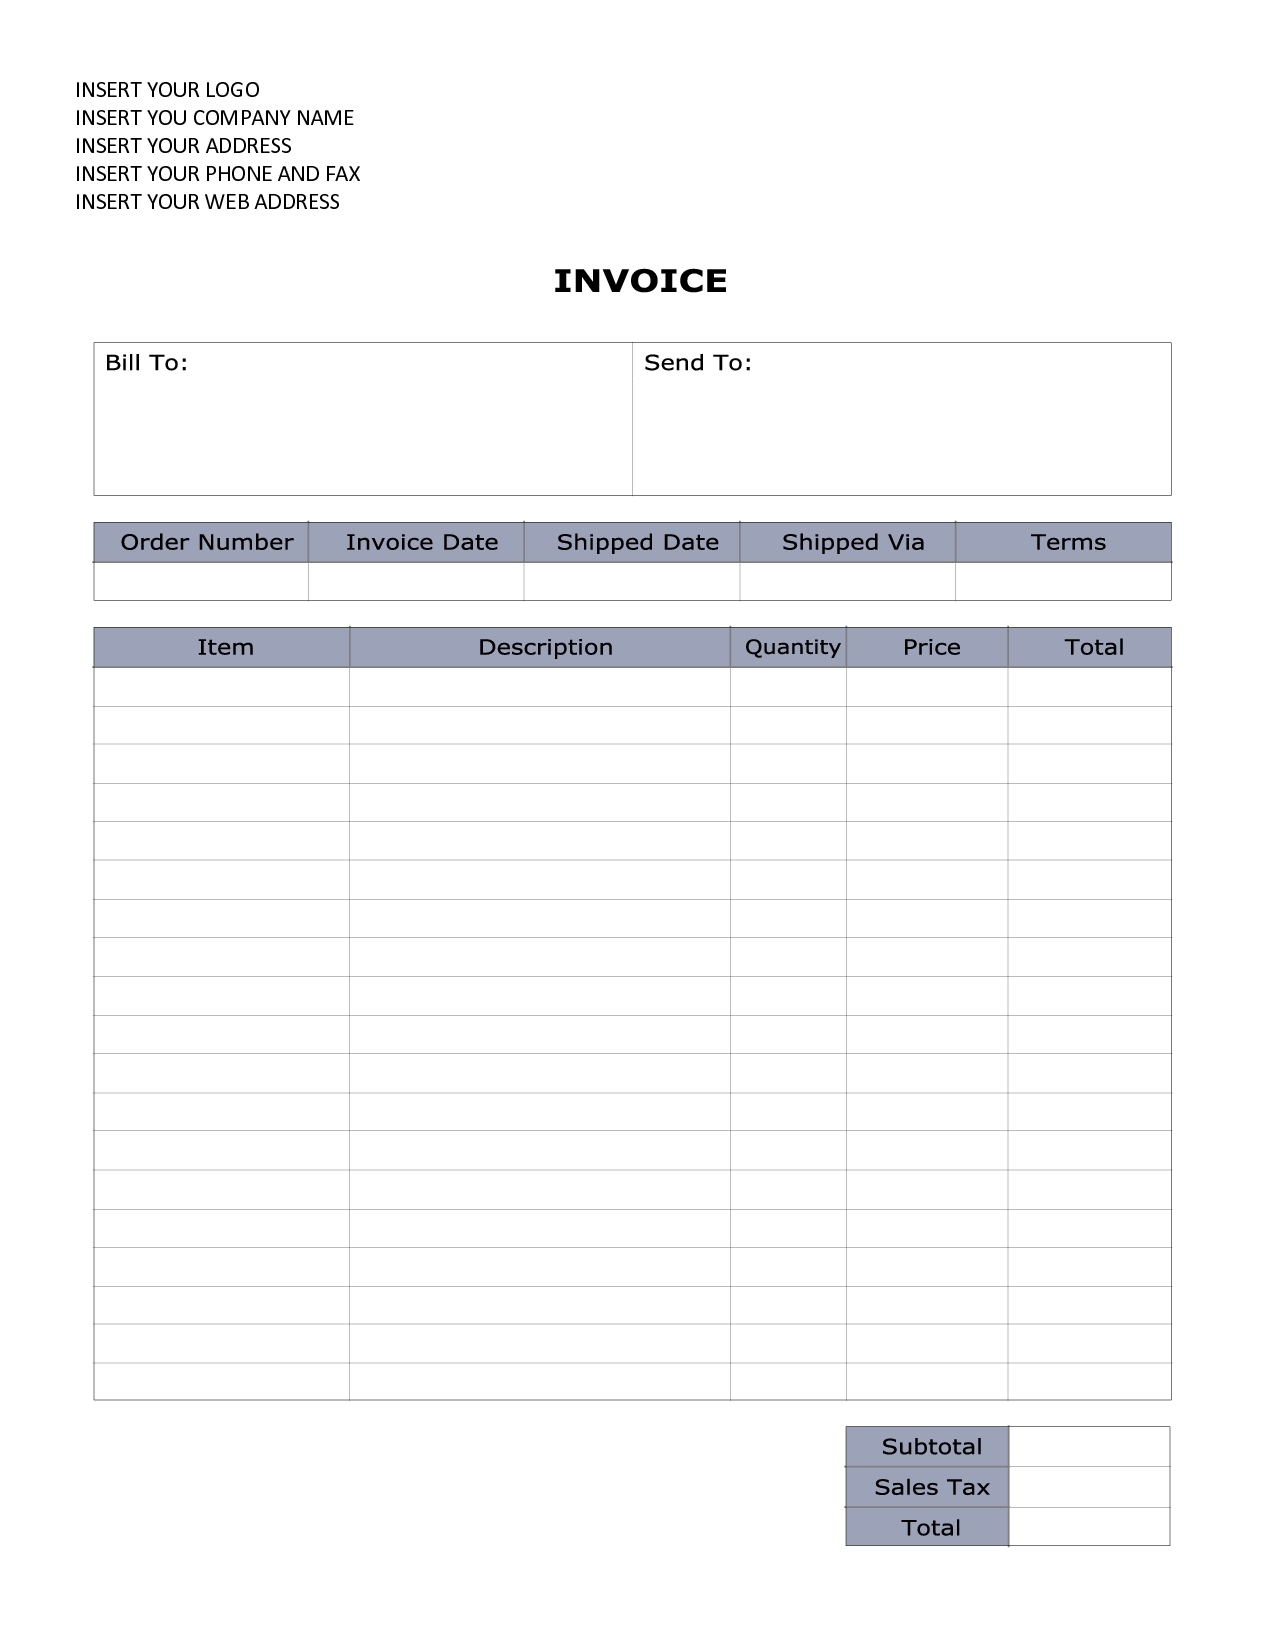 1000 images about invoice on pinterest invoice form word